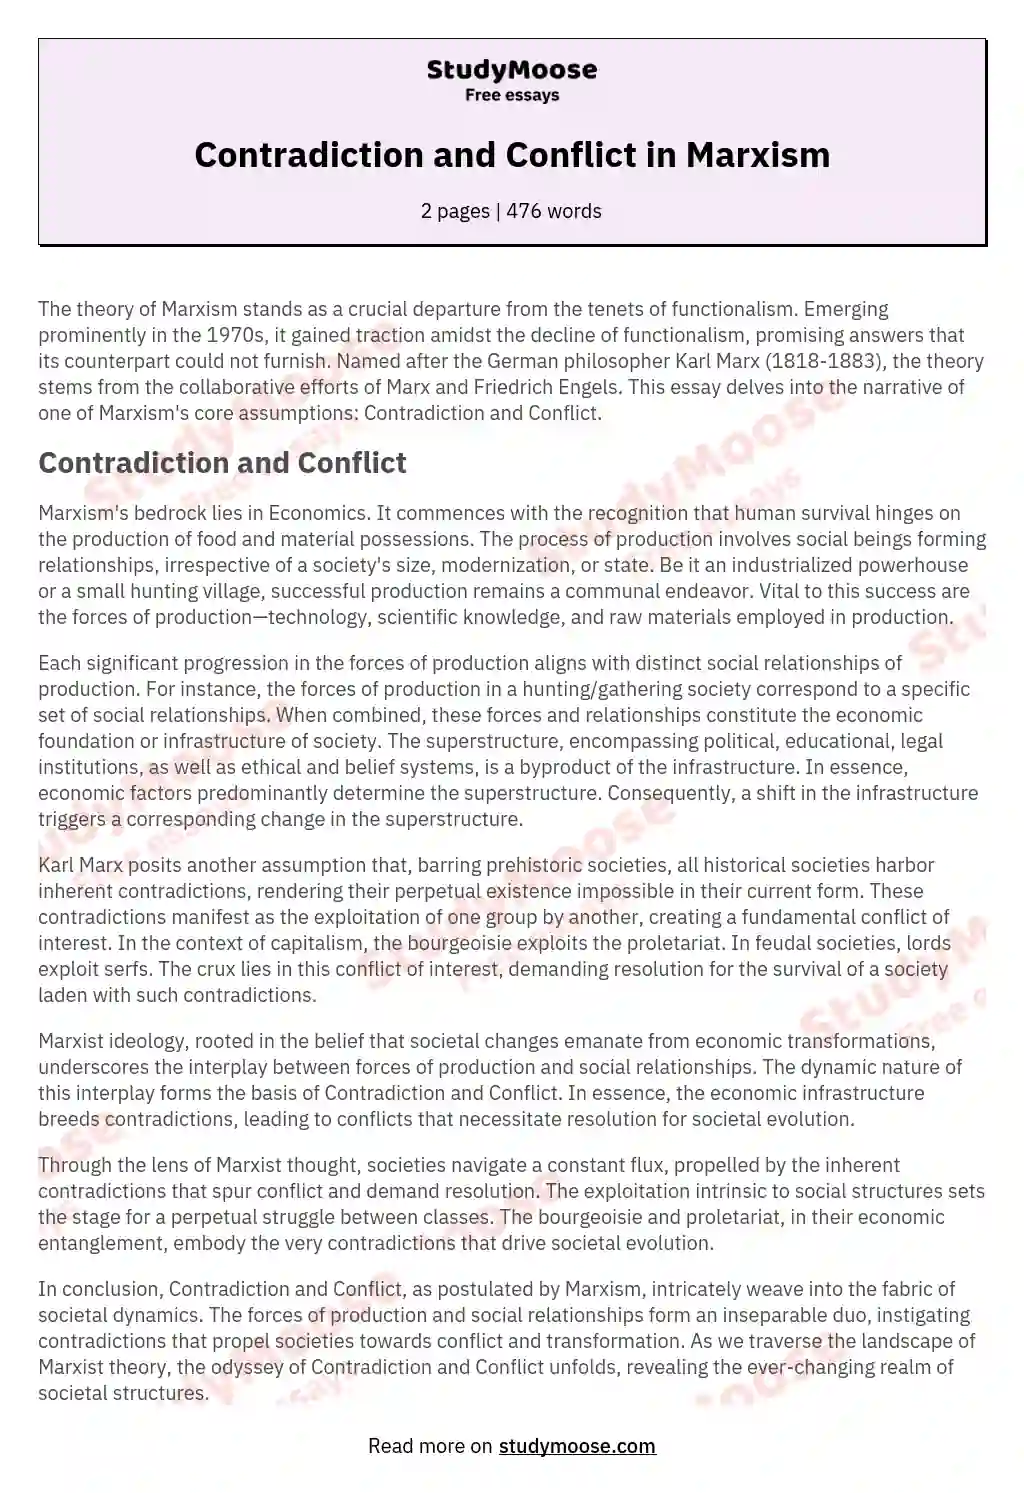 Contradiction and Conflict in Marxism essay